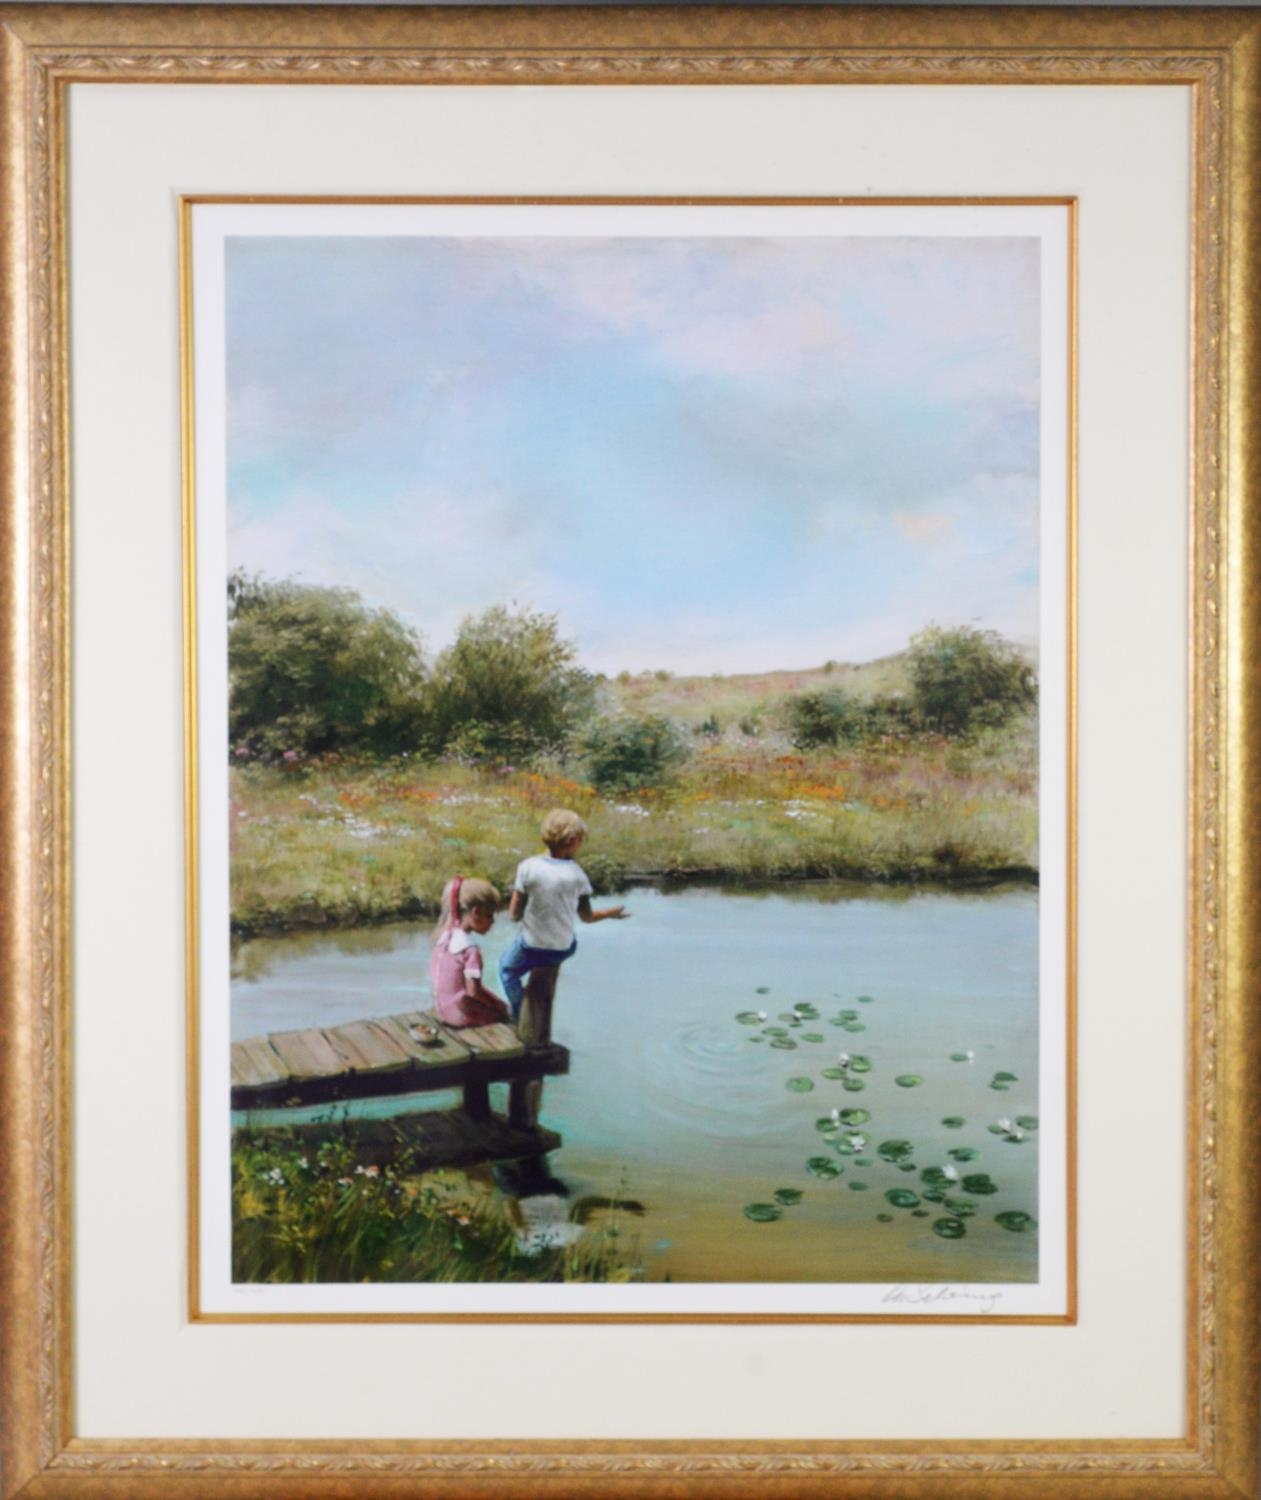 W.R.MAKINSON ARTIST SIGNED LIMITED EDITION COLOUR PRINT Cattle at water (357/500) no certificate - Image 3 of 4